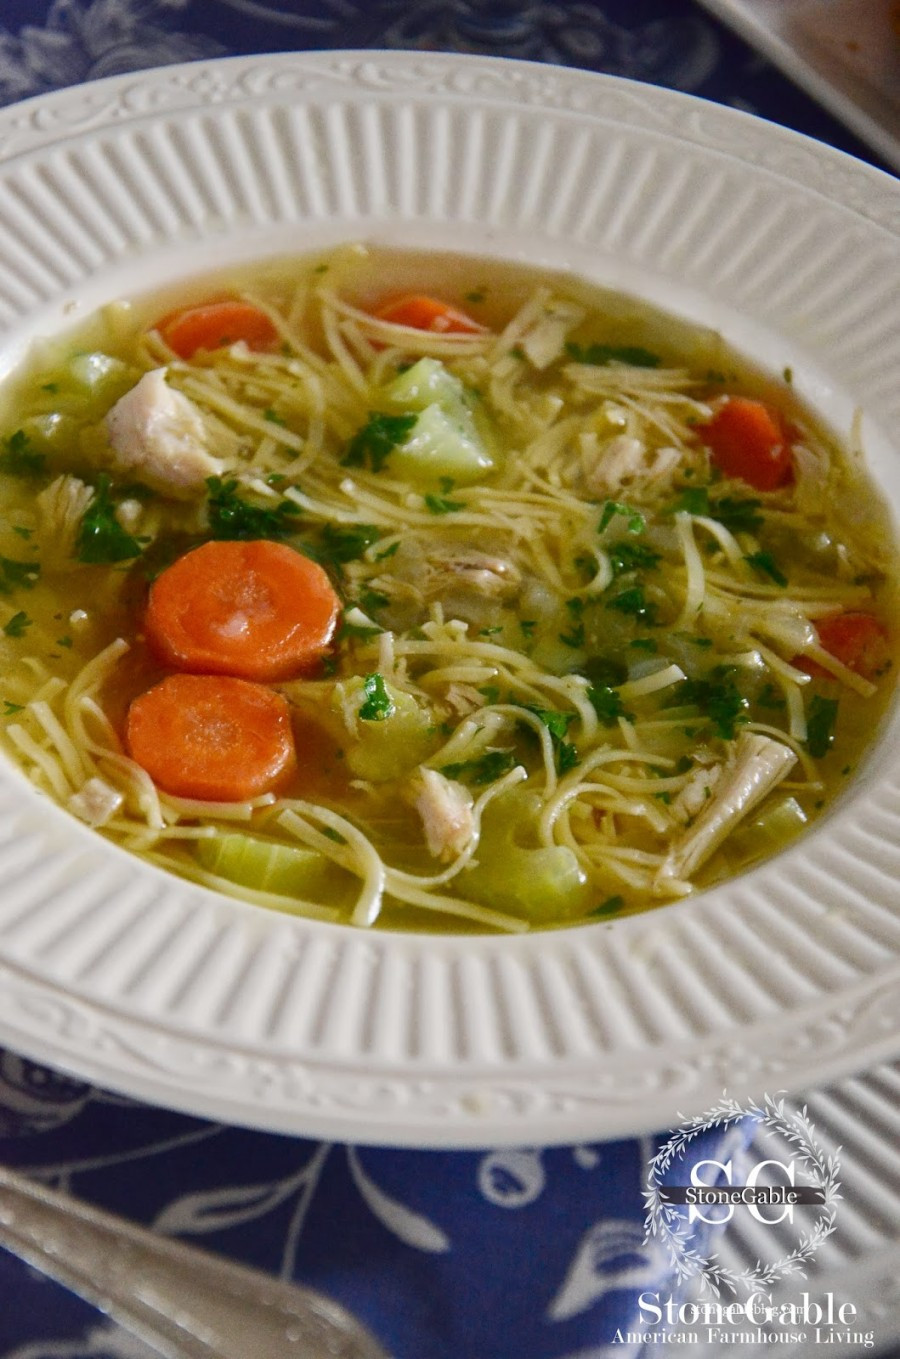 Make Chicken Noodle Soup
 How To Make Perfect Chicken Noodle Soup StoneGable